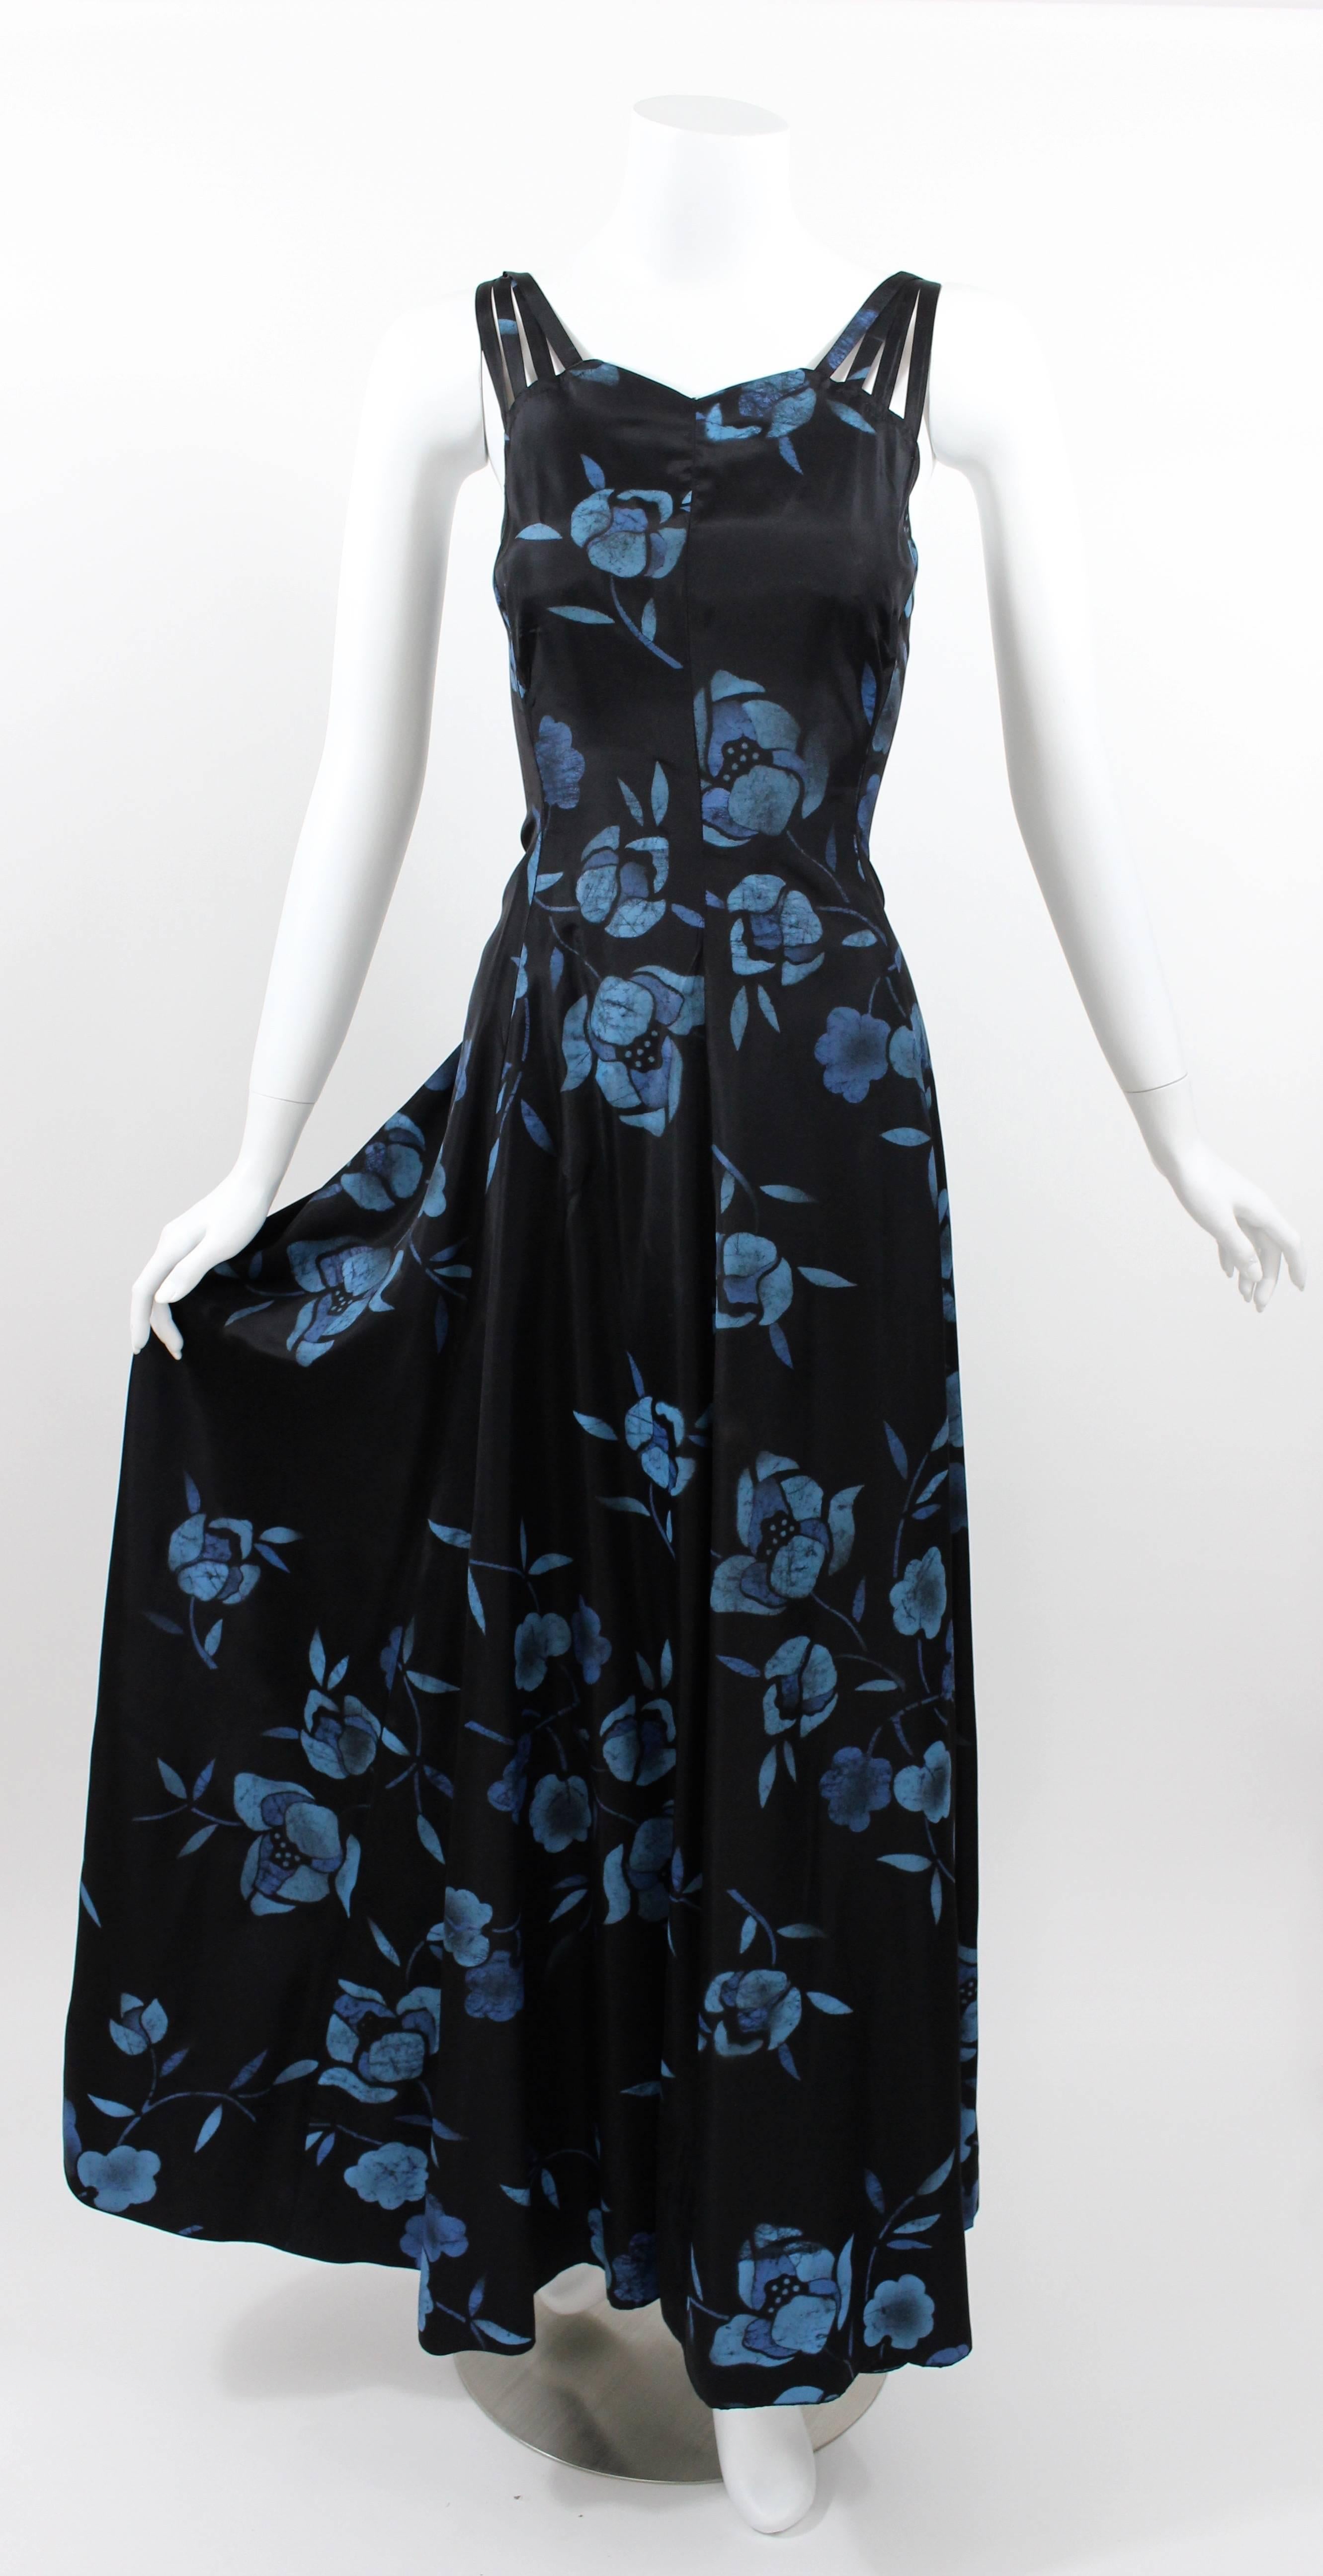 Women's 1930s Black and Blue Batik Floral Print Strappy Sleeveless Maxi Dress / Gown For Sale